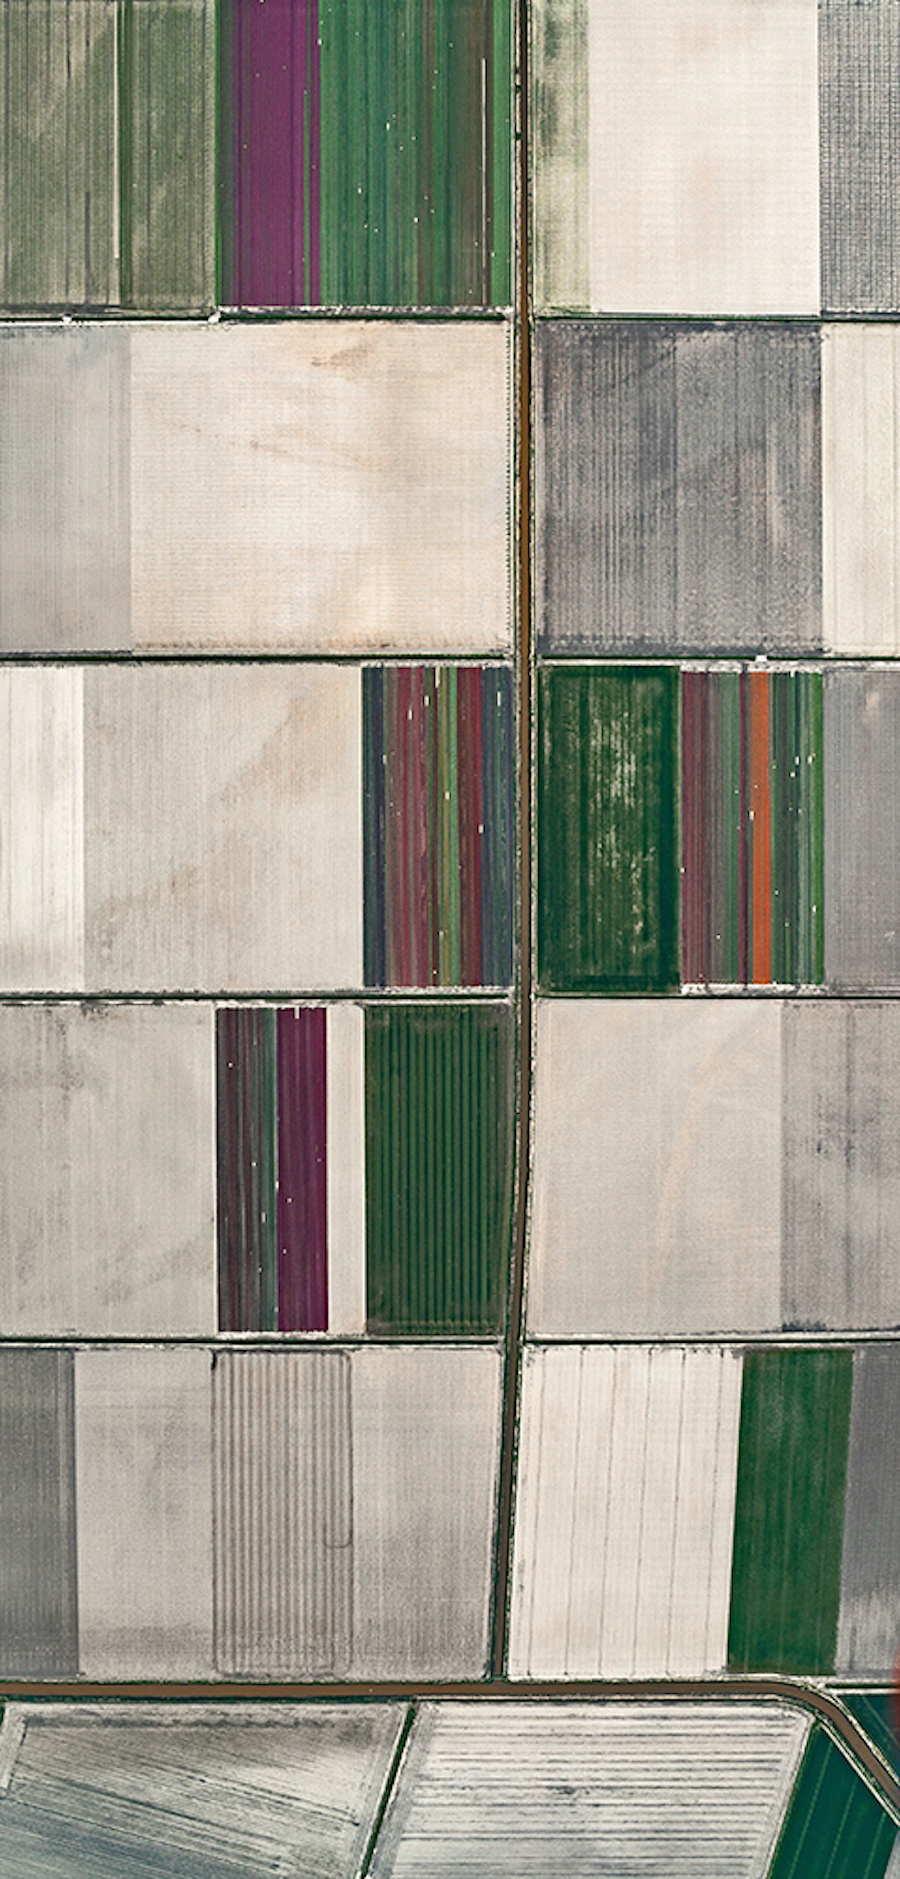 Multicolored Tulip Fields From the Air20